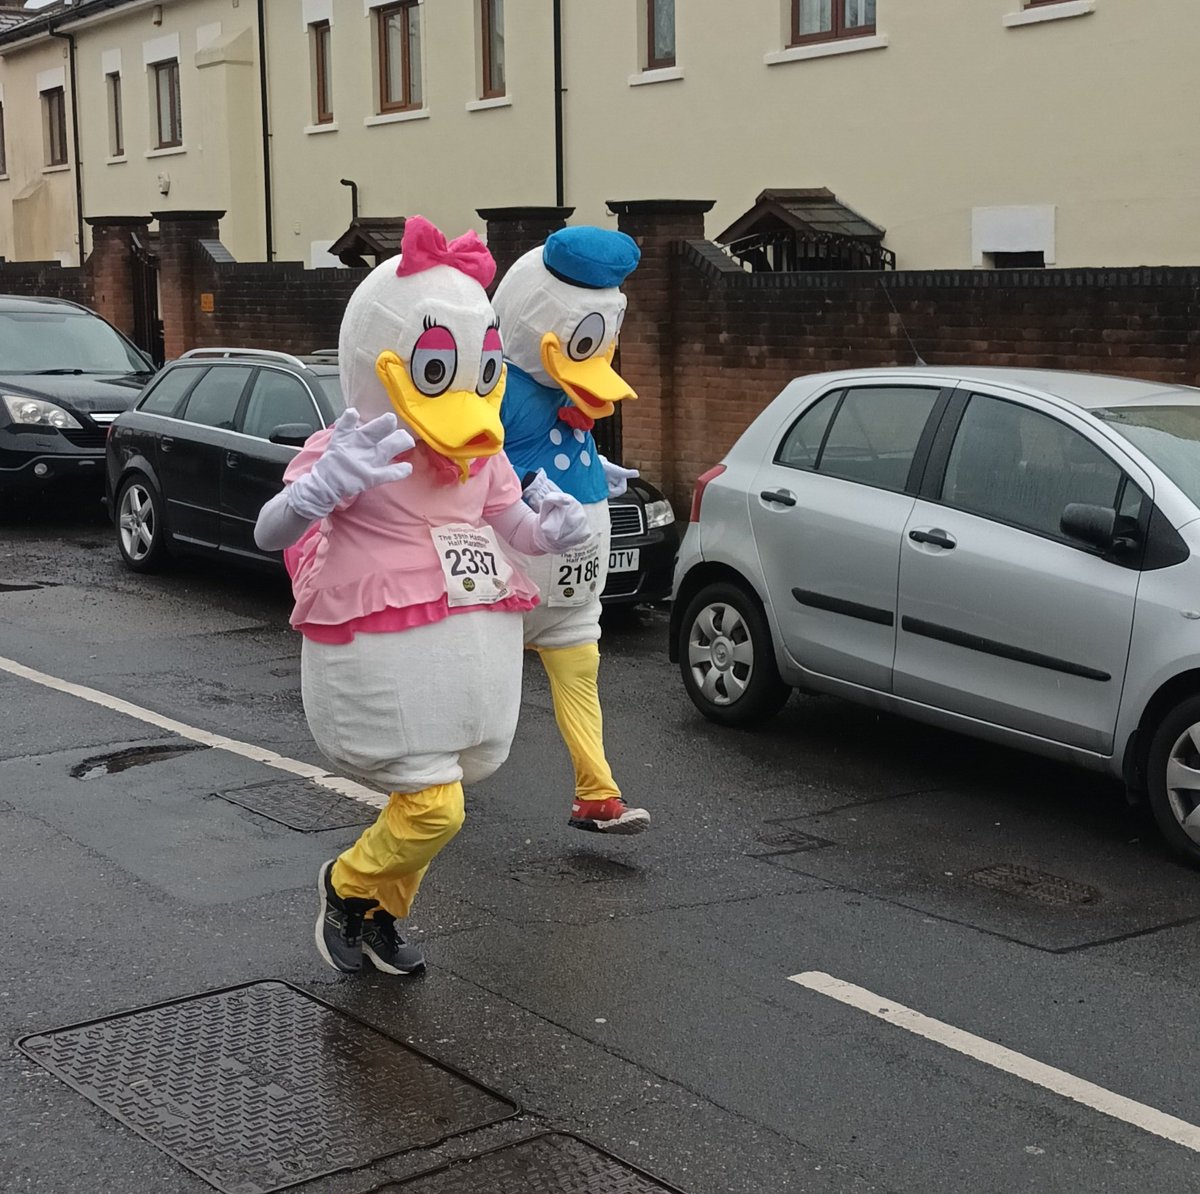 Hello. It was the Hastings Half Marathon today. We ran it last year, but cos of stuff, we were just spectators today. It was rainy, but there were great crowds. Charlie Brisley (the guy in orange) won it. Also, ducks.! #hastingshalf #hastings #hastingshalfmarathon